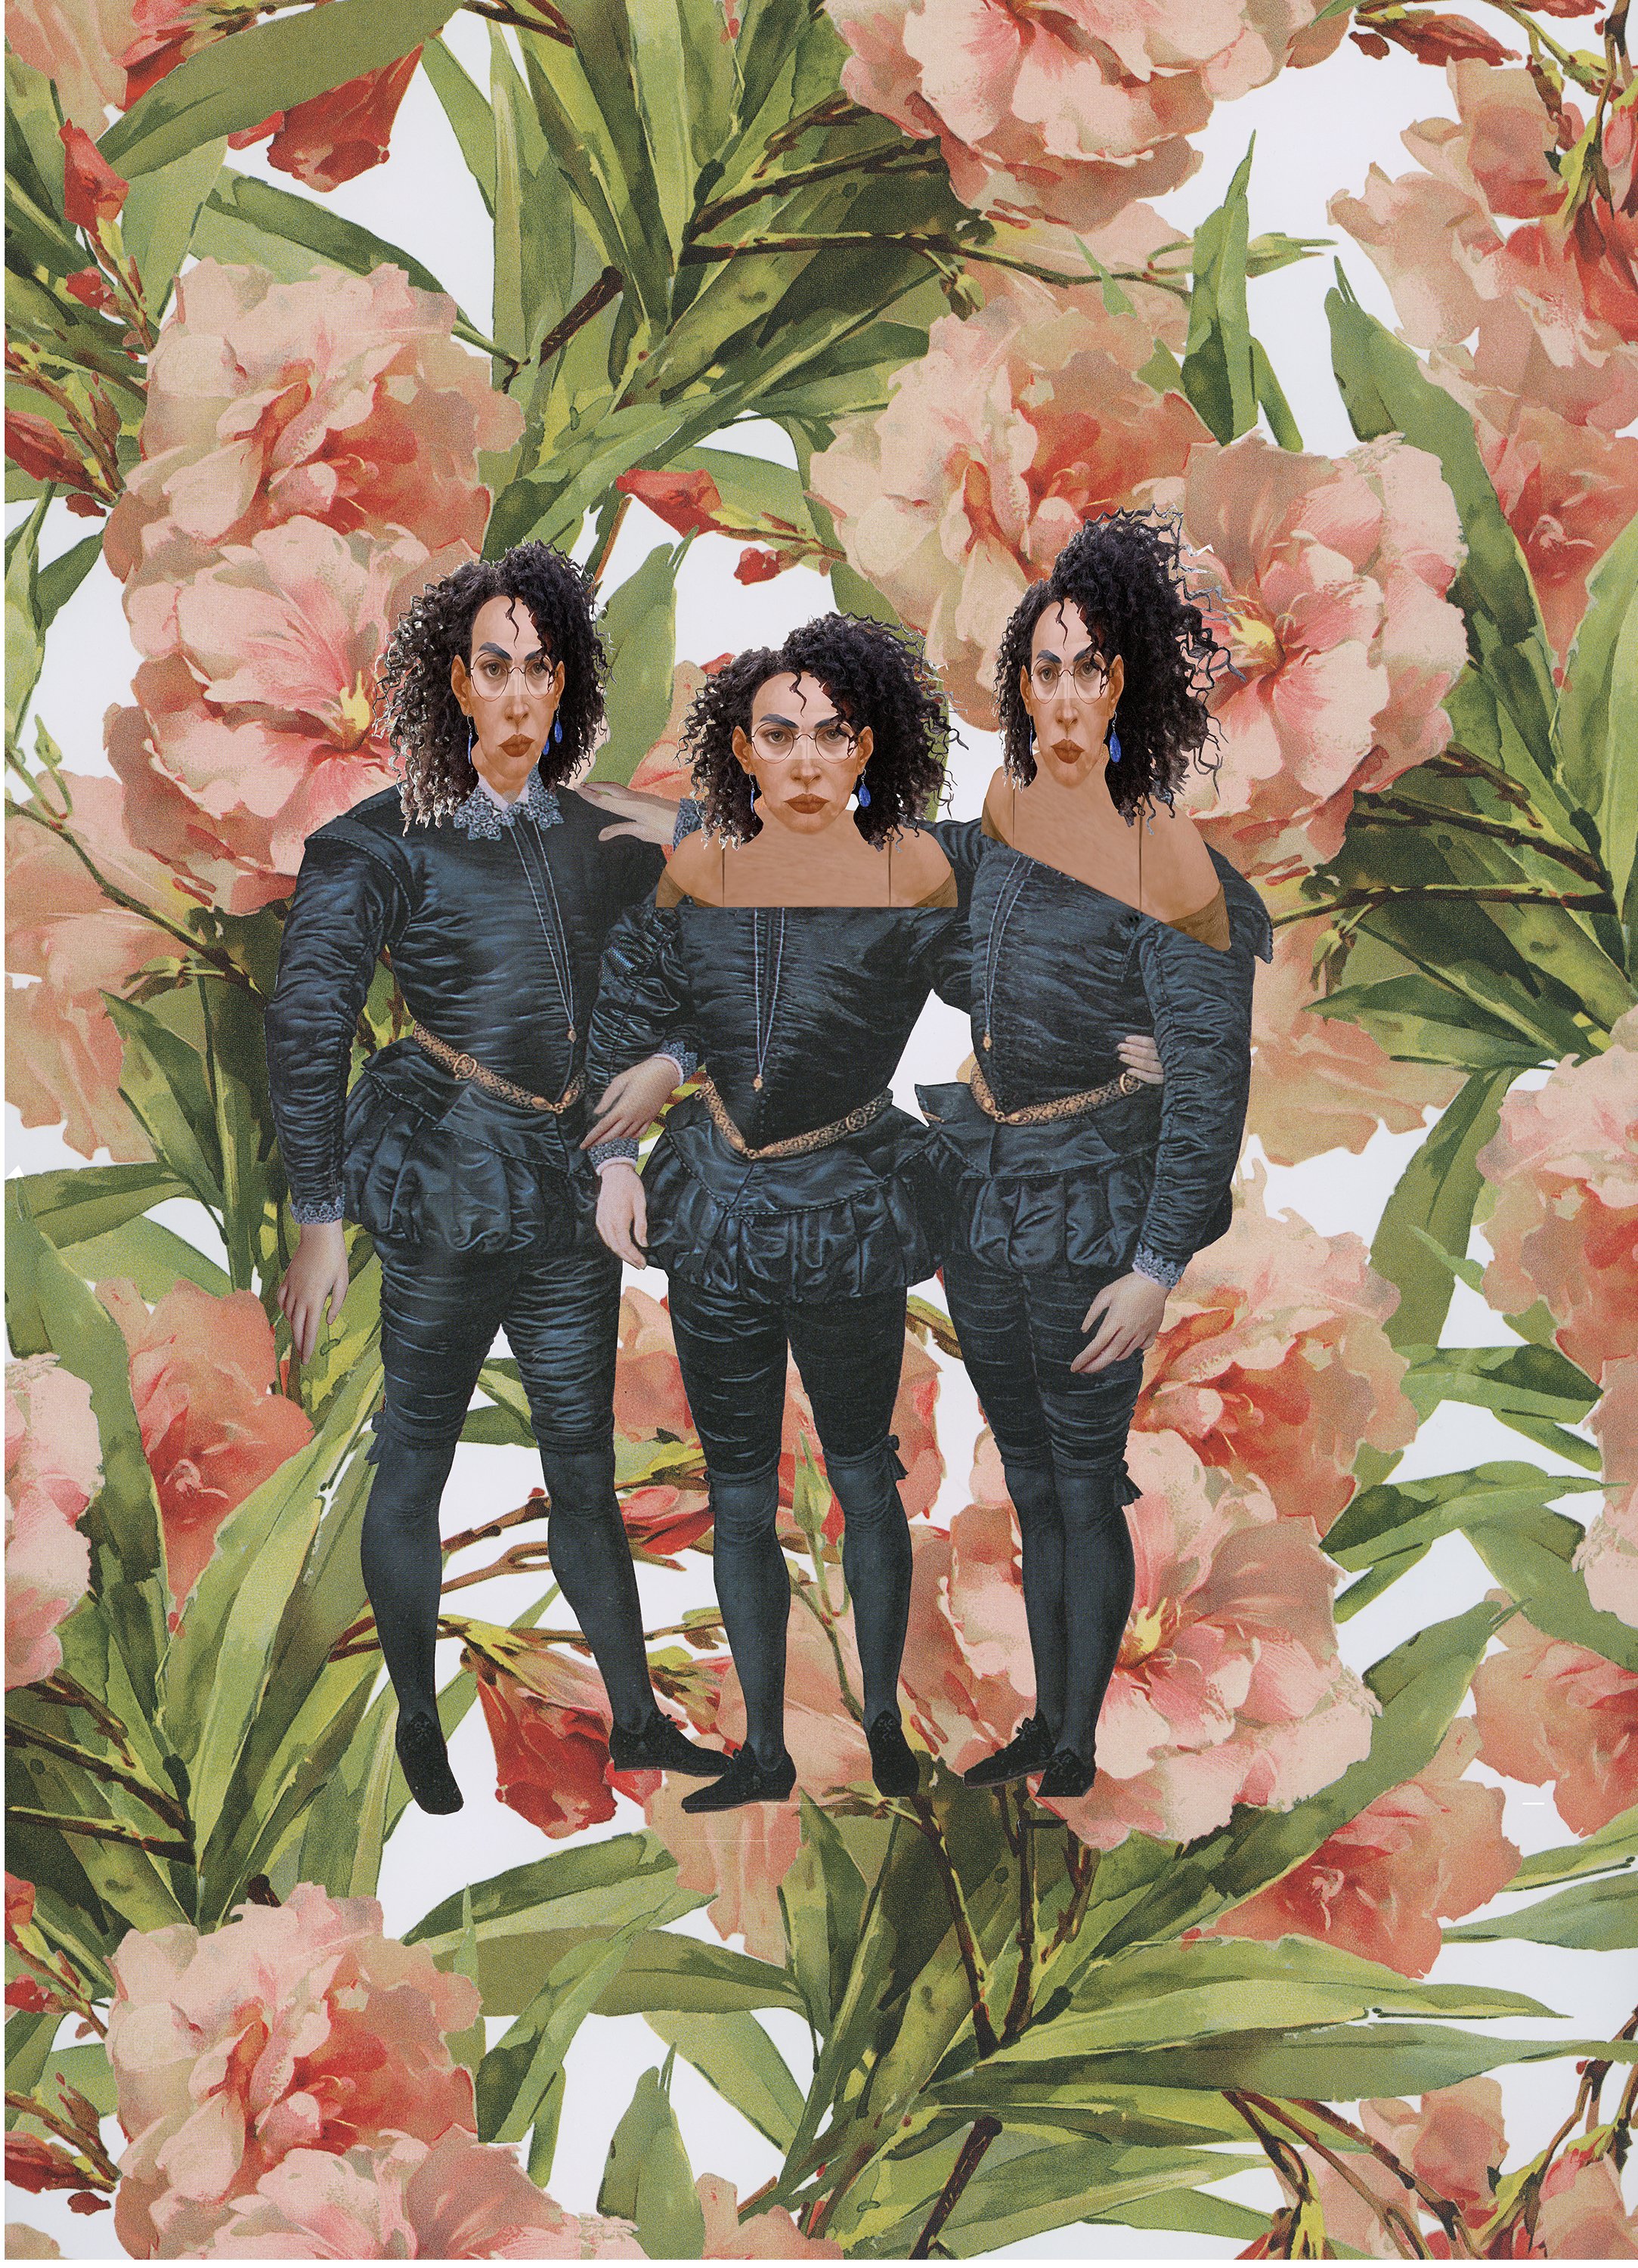 TRIPLETS IN FLORAL SETTING